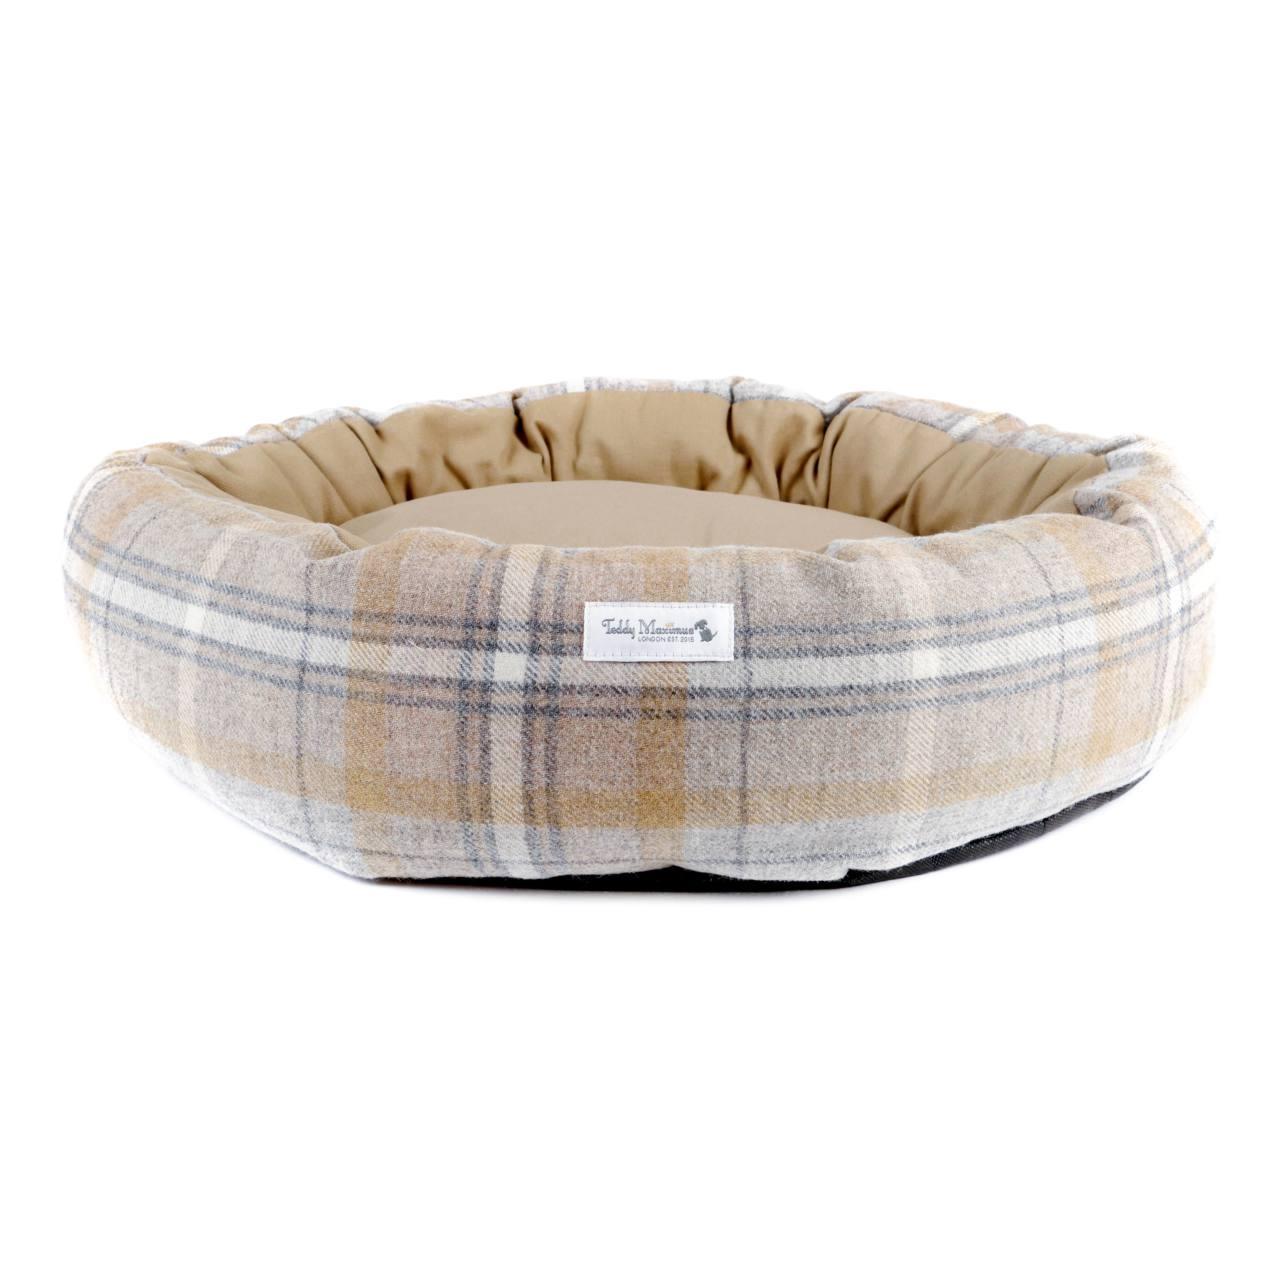 An image of Teddy Maximus Luxury Cocoon Bed Sand Shetland Wool